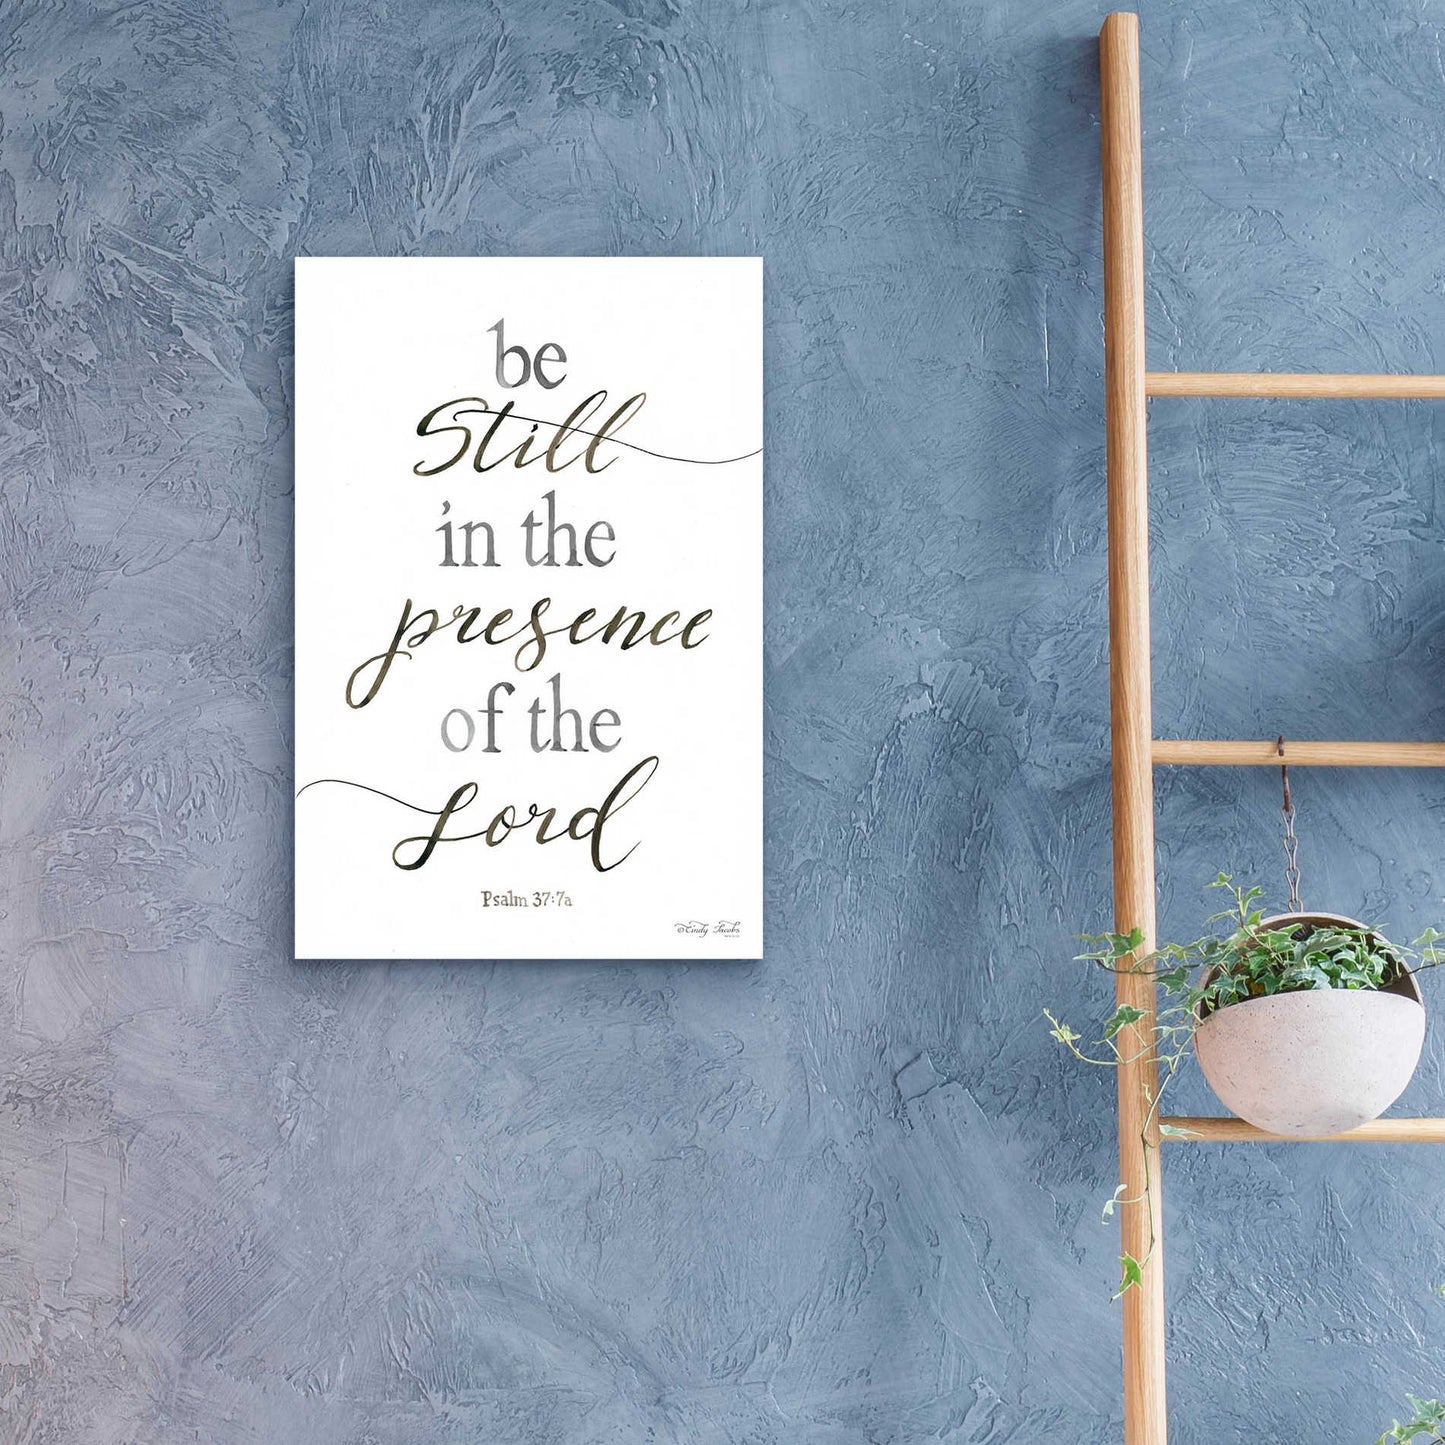 Epic Art 'Be Still in the Presence of the Lord' by Cindy Jacobs, Acrylic Glass Wall Art,16x24